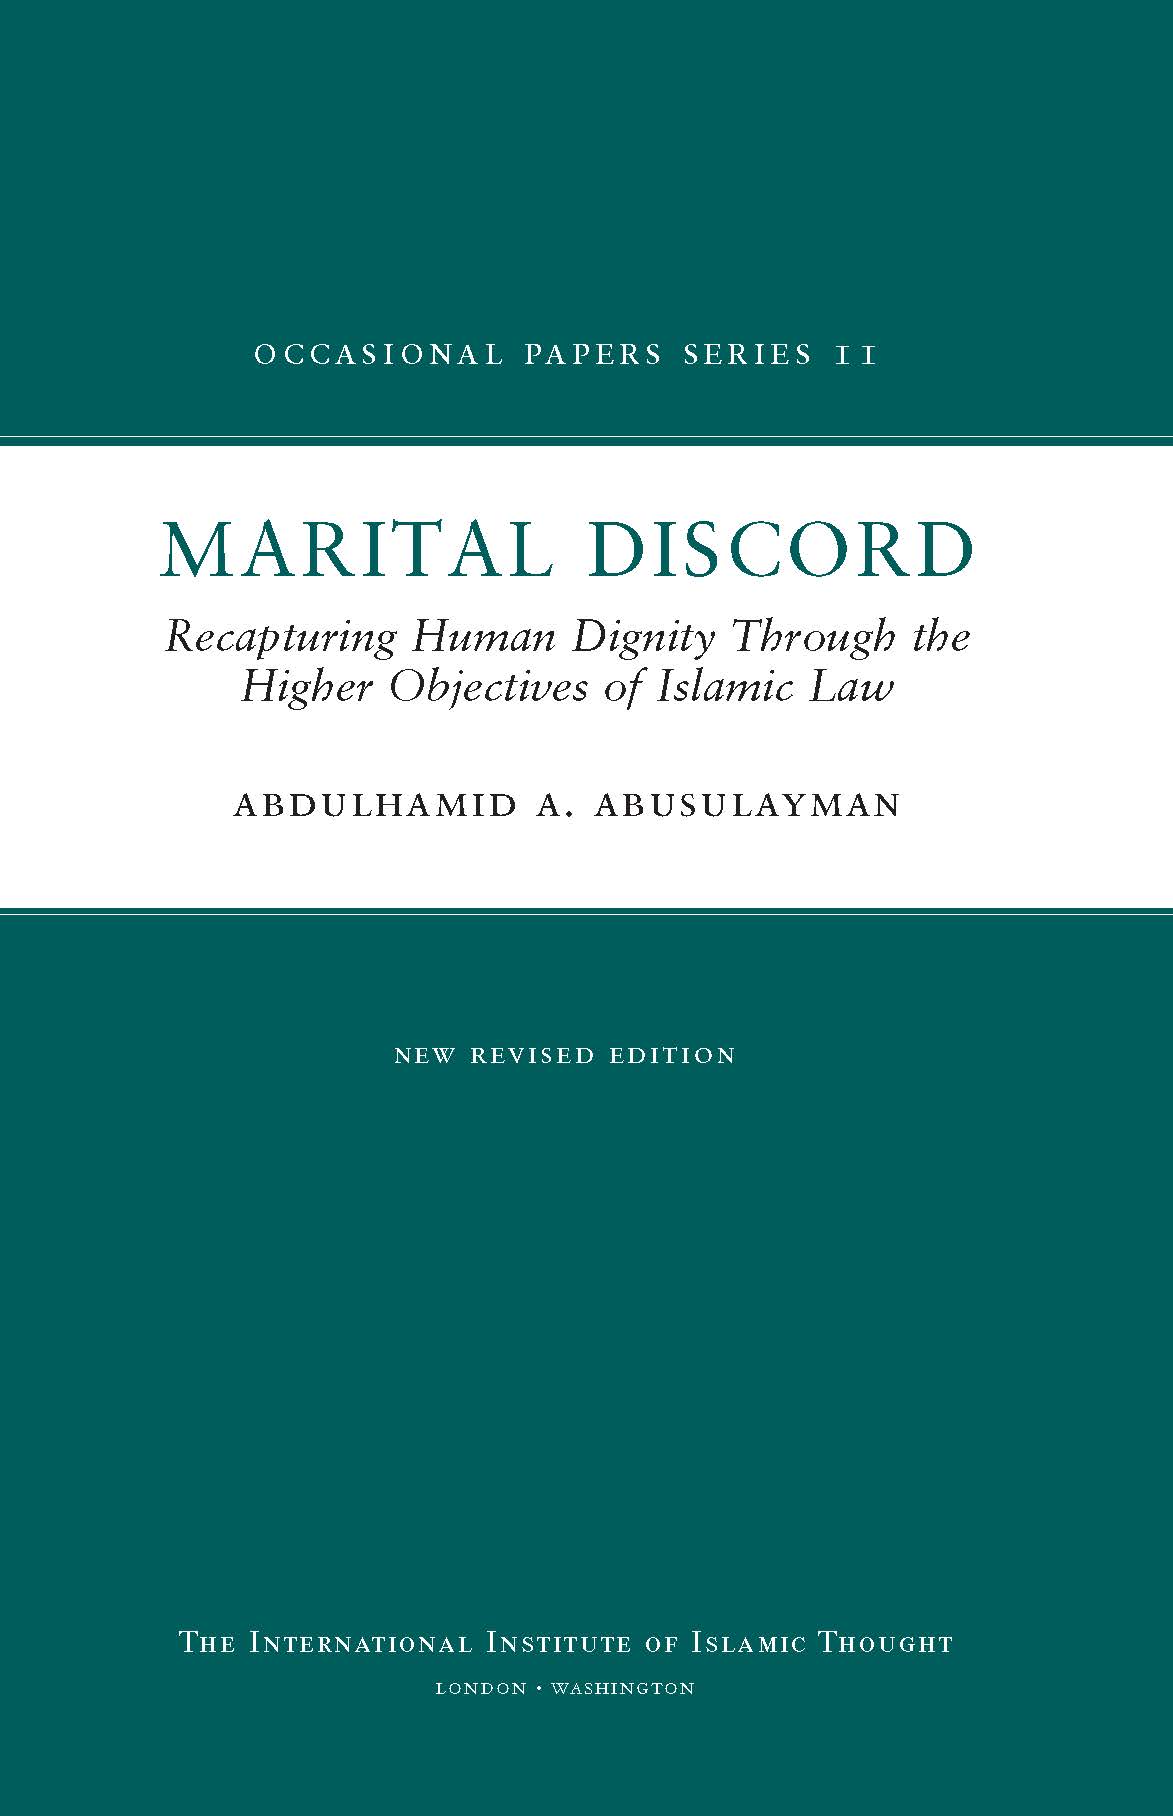 Marital Discord: Recapturing the Full Islamic Spirit of Human Dignity Through the Higher Objectives of Islamic Law